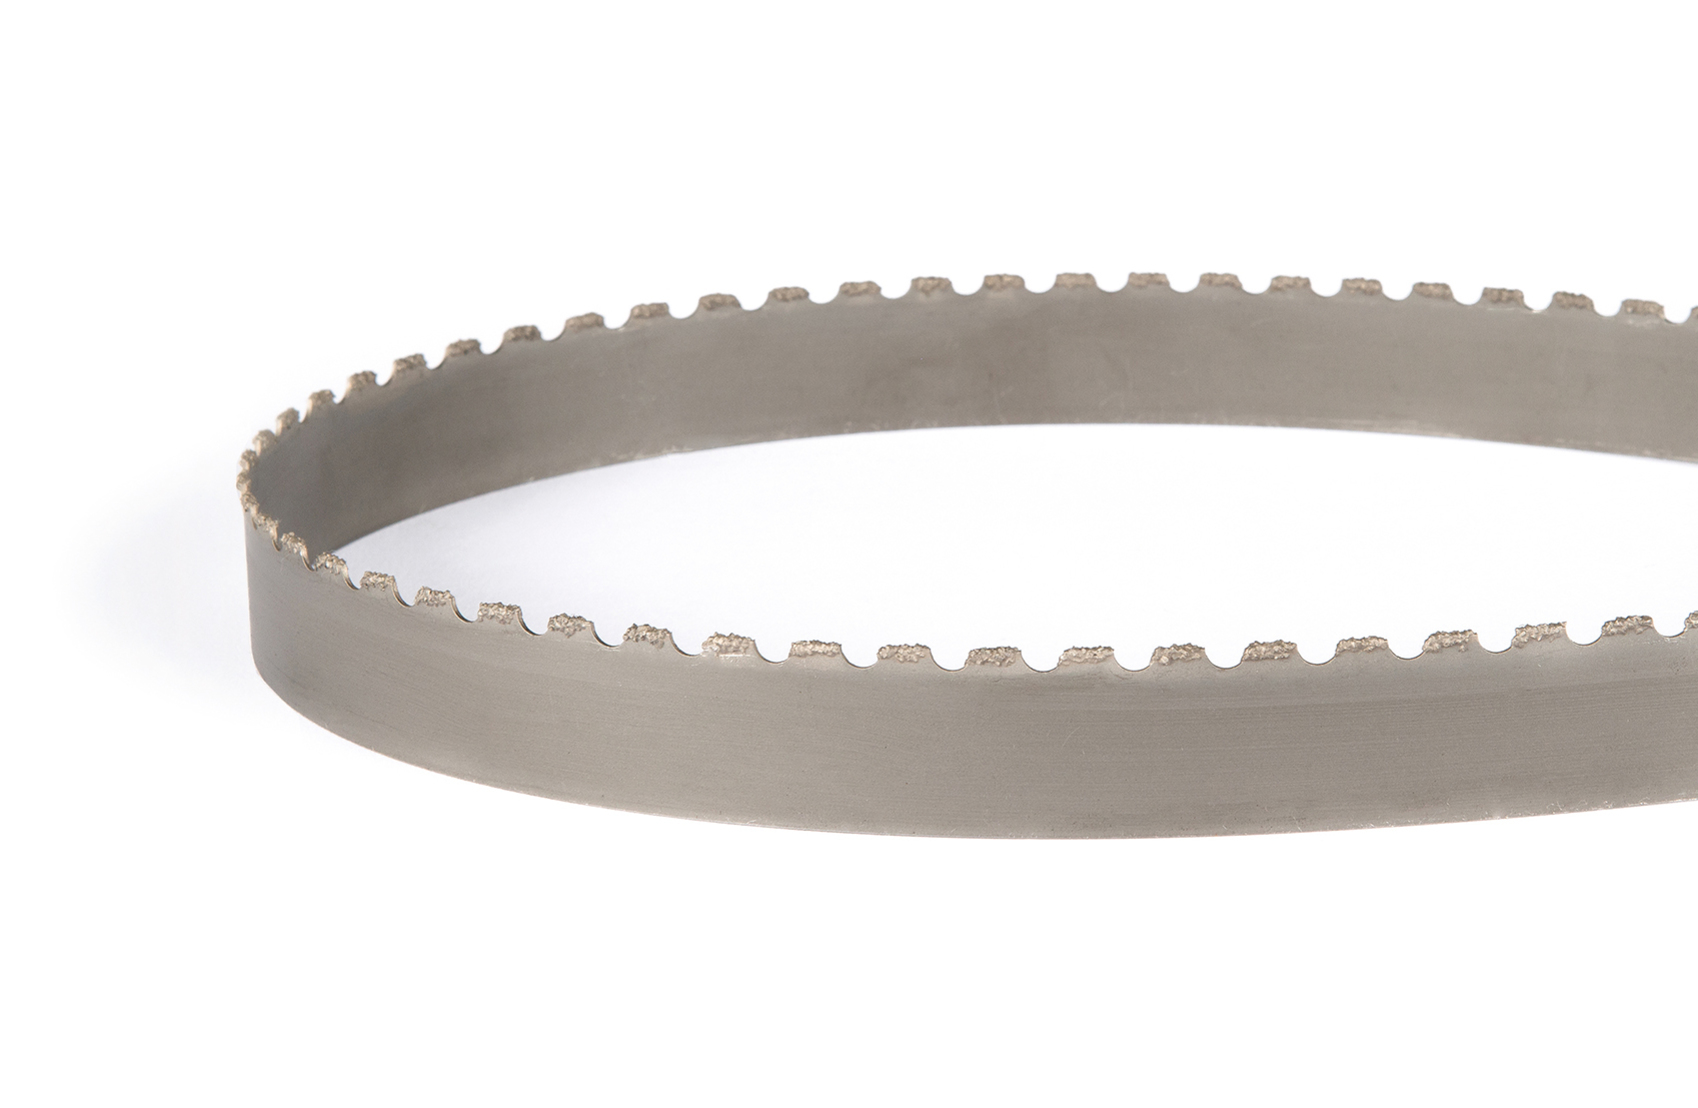 From Chronos 70" Long Bandsaw Blade 24 TPI 3/8" Wide Ref: 7703296 